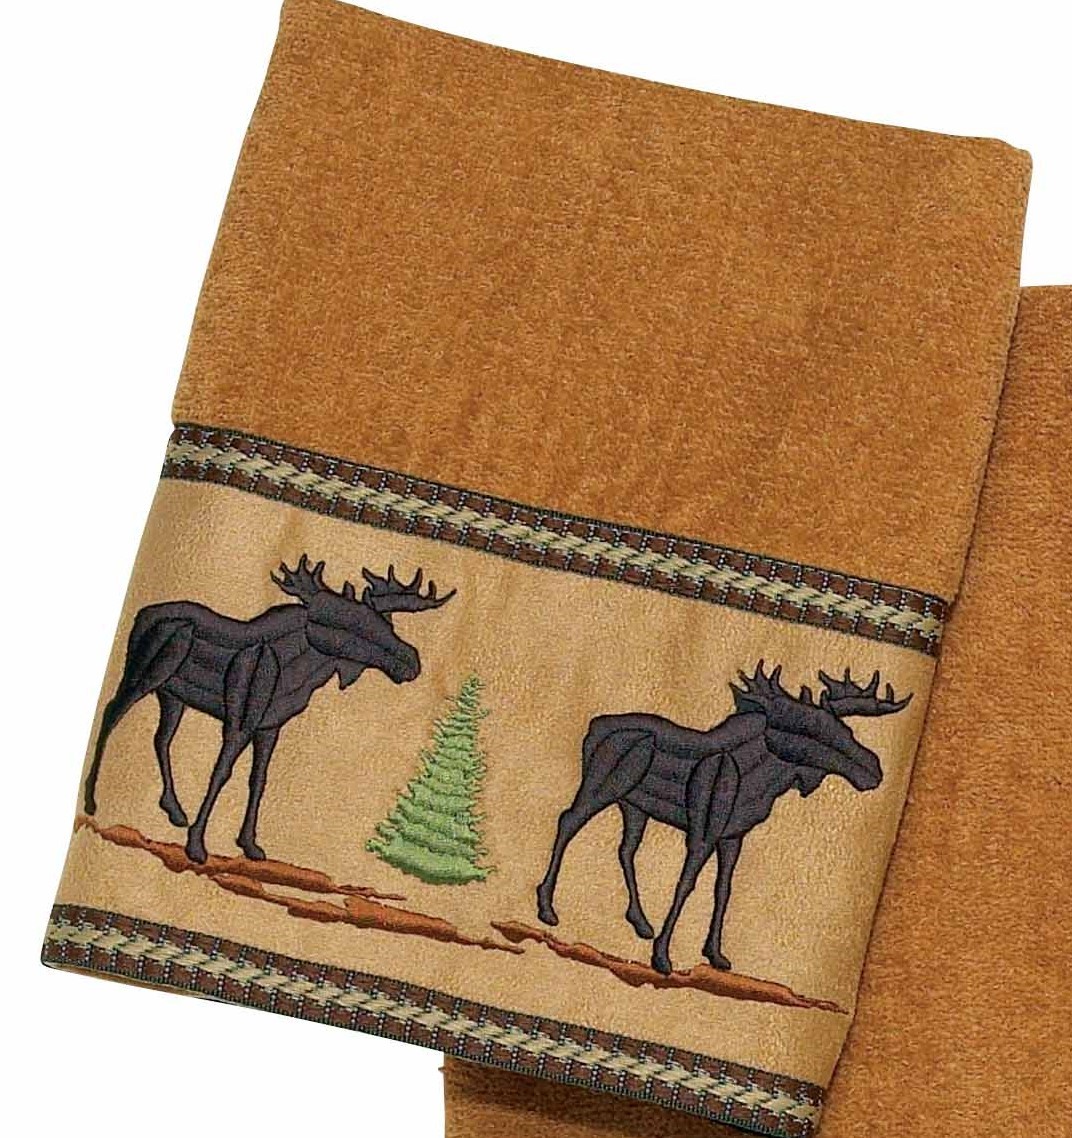 Bathroom Rustic Log Cabin Forrest Decor Soft Moose Hand Towel New with tags 